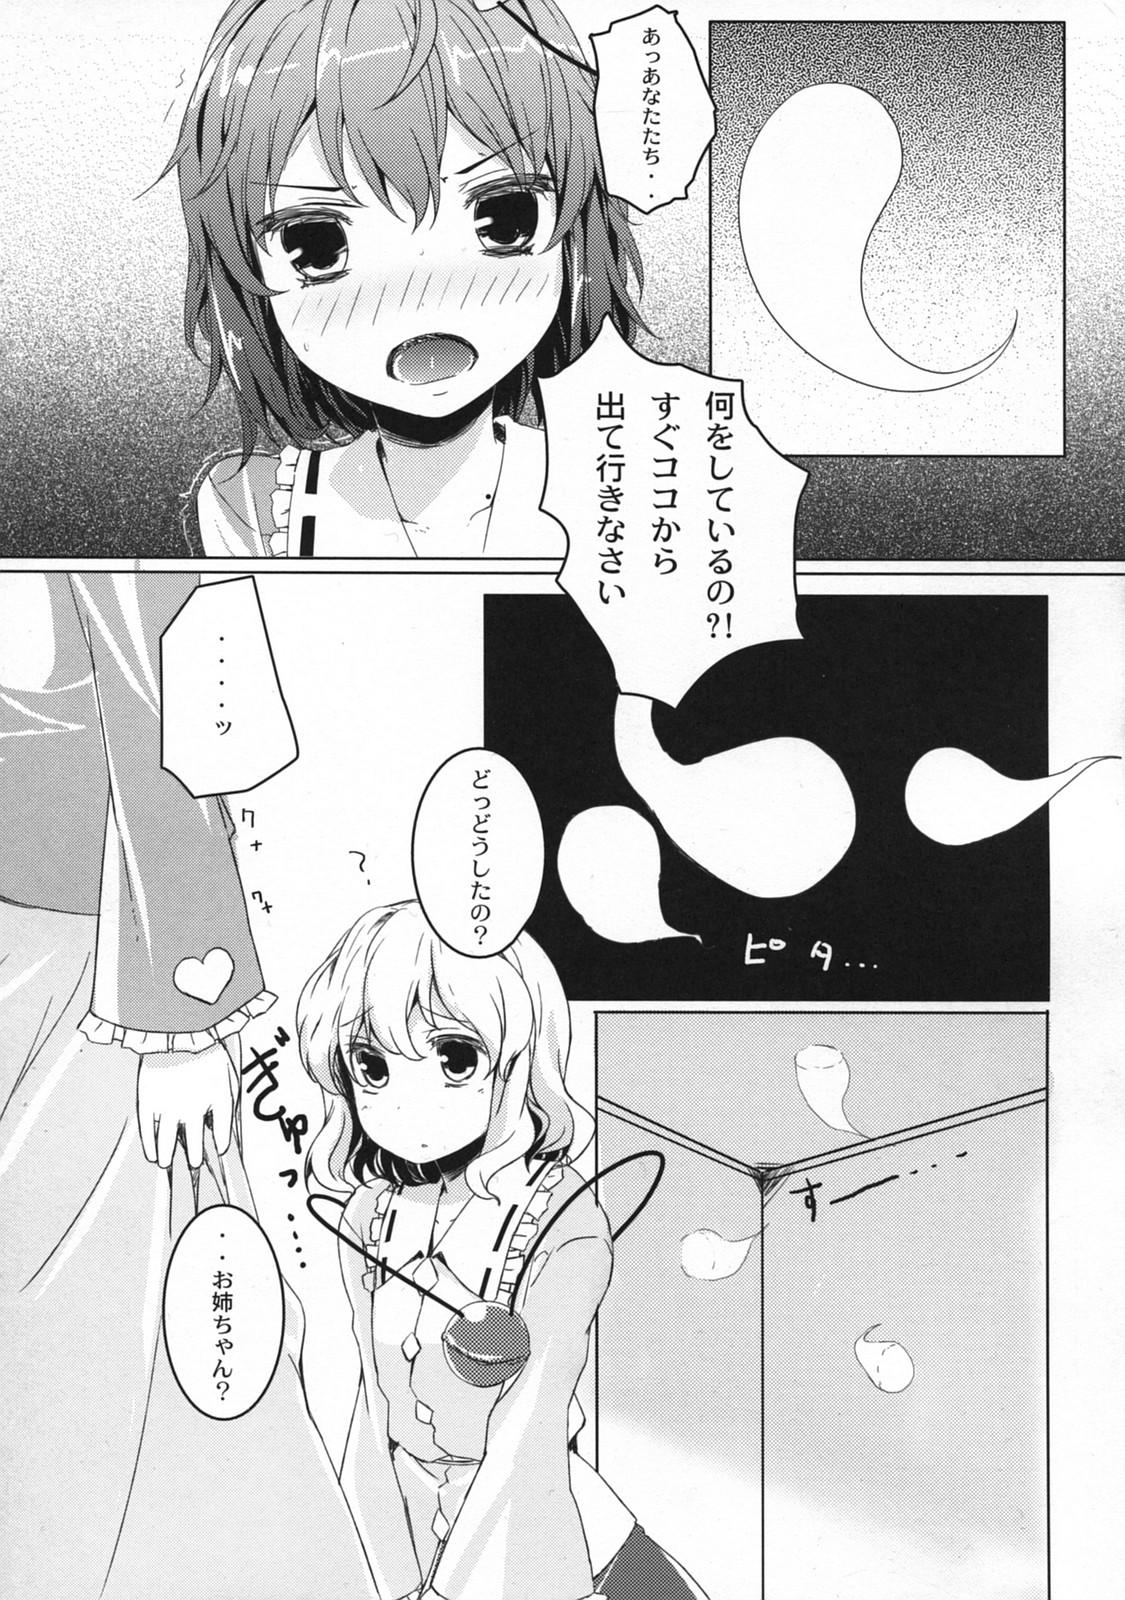 Curious BABY BAD DREAM - Touhou project Peru - Page 8